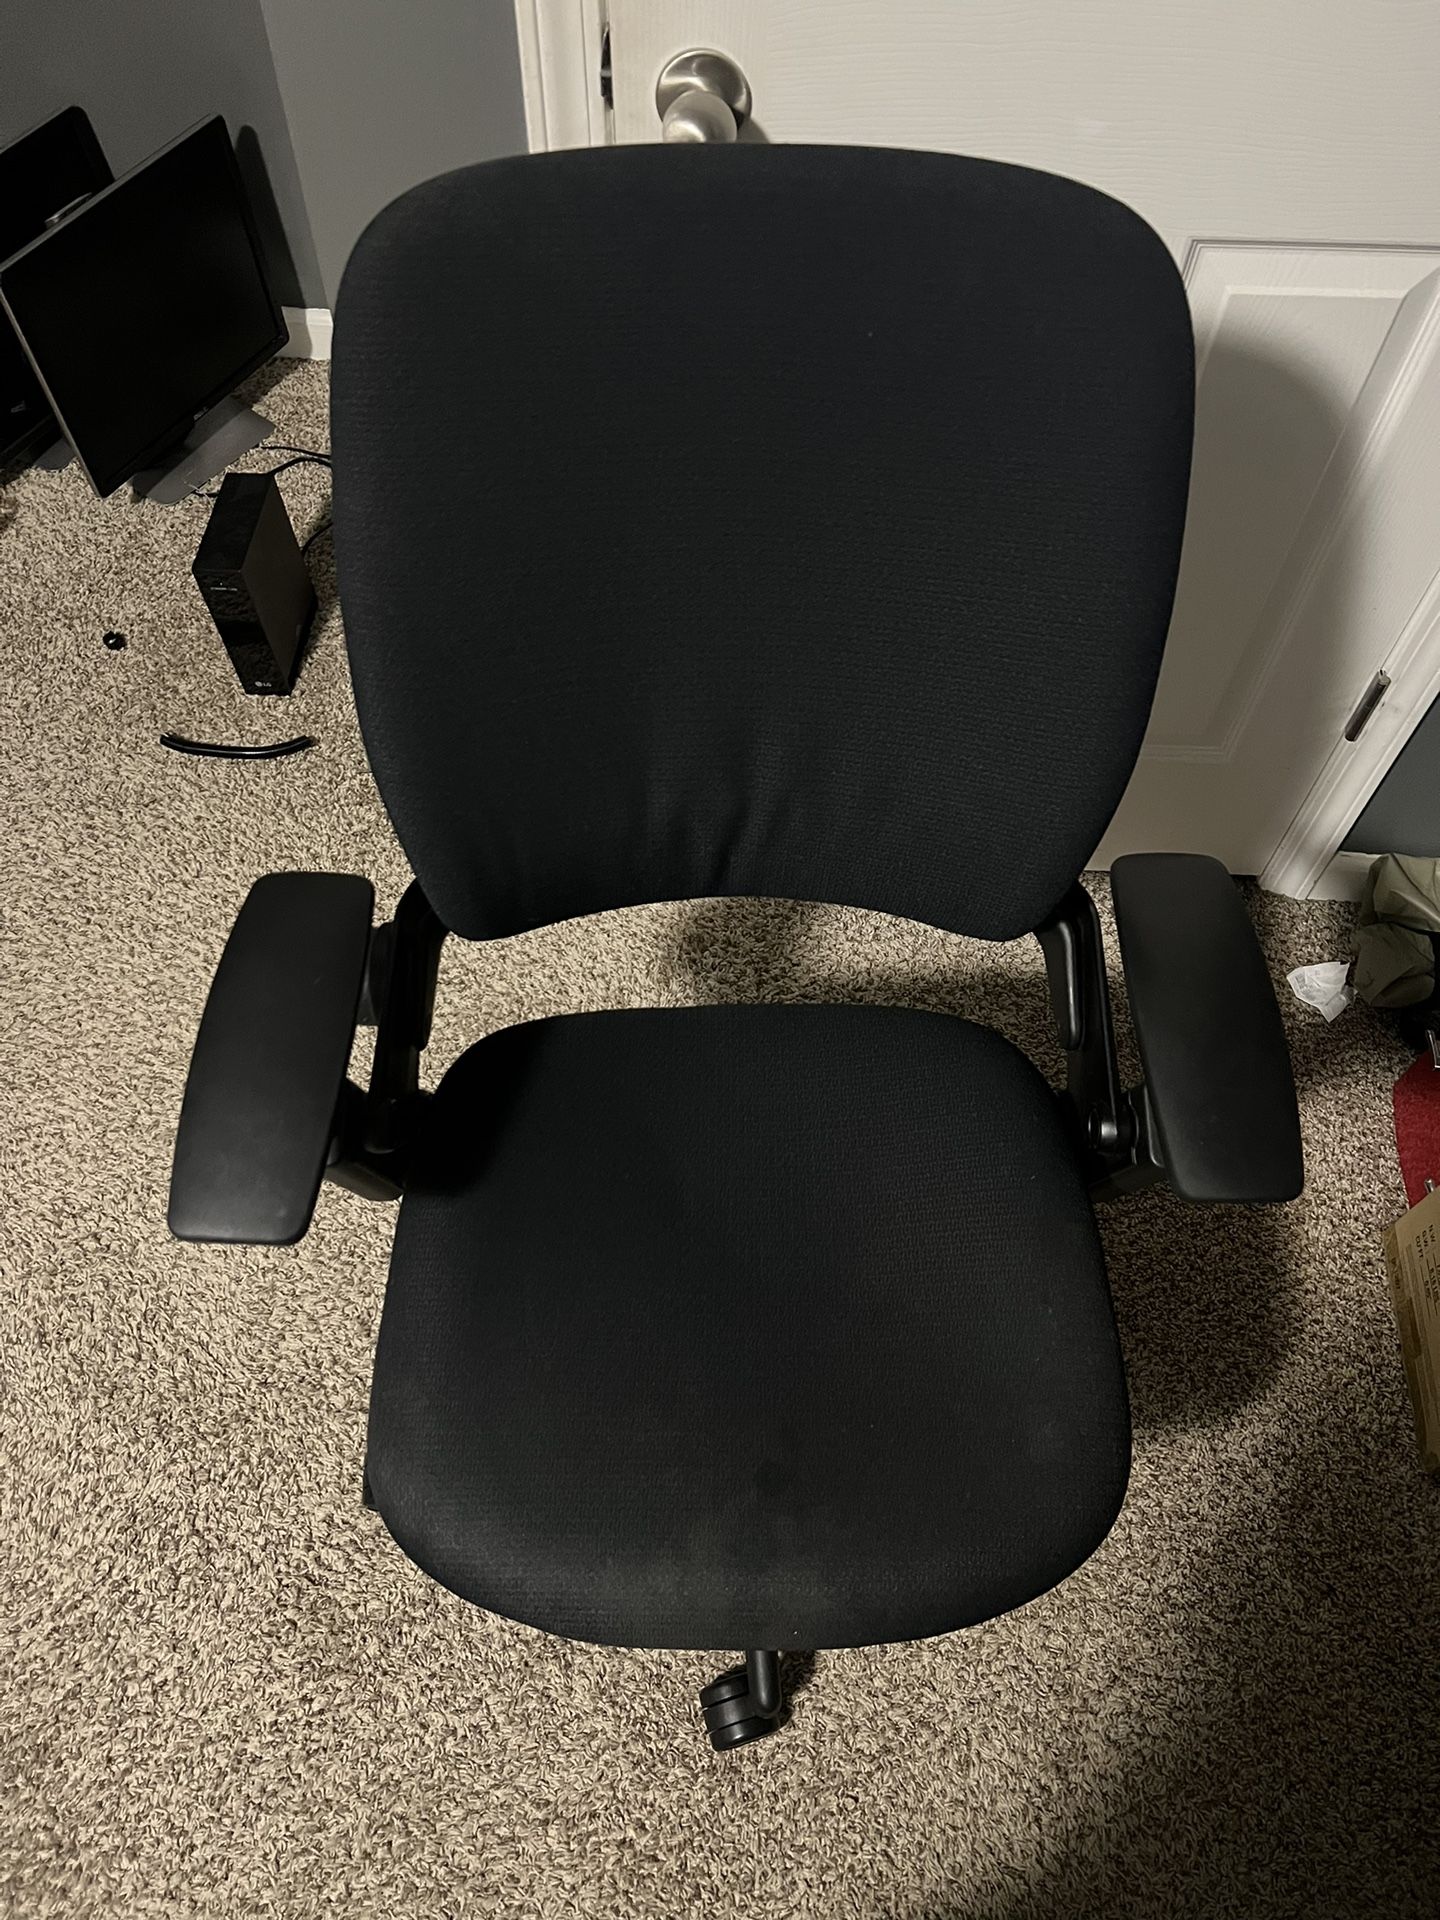 Steelcase leap chair 